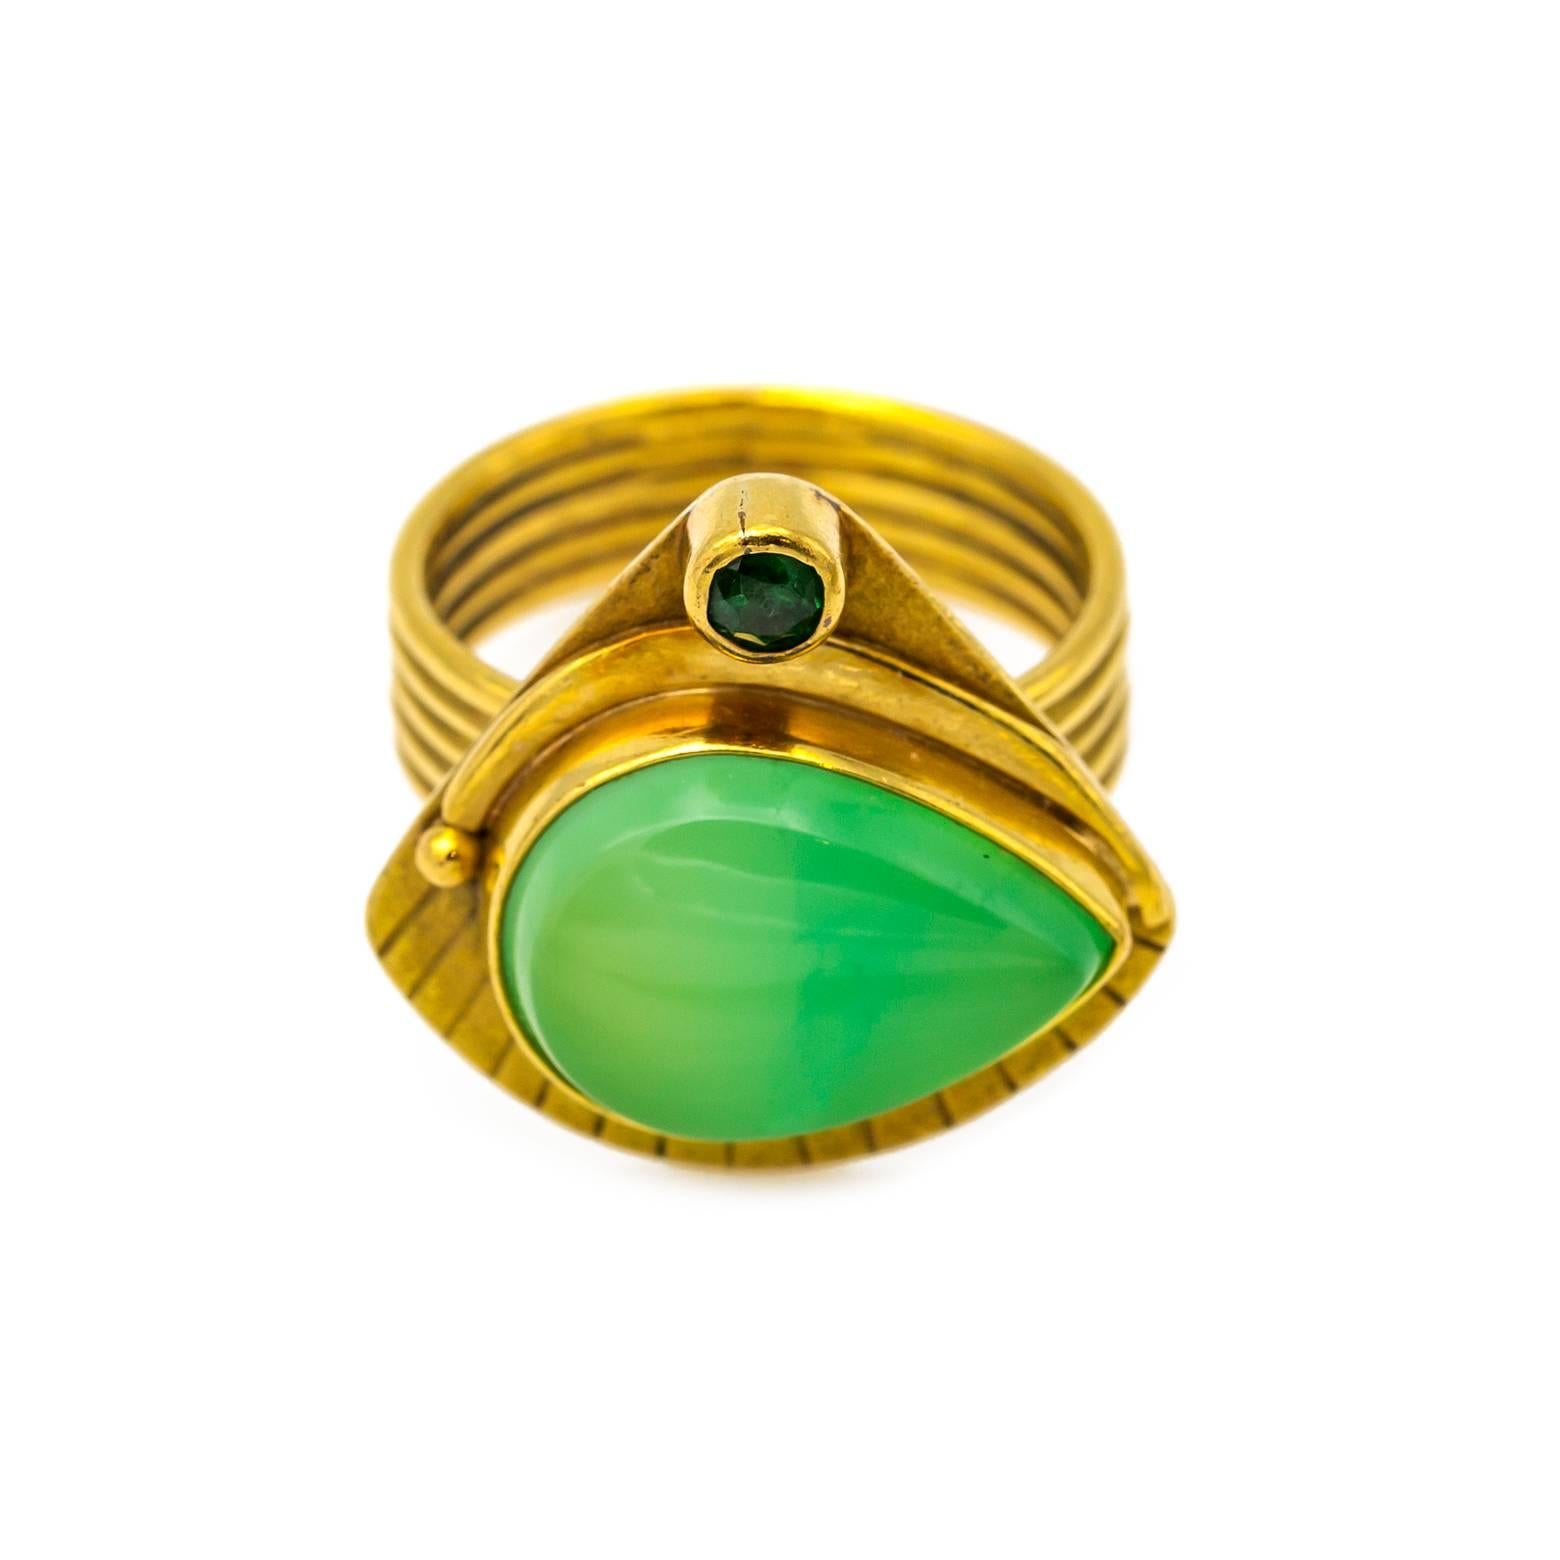 This gorgeous vintage and retro 18K yellow gold ring is a stunner with green garnet and an tear drop chalcedony. The pyramid shape is textured to give it an extra fan-like share. In excellent condition and made in excellent fashion by a truly gifted